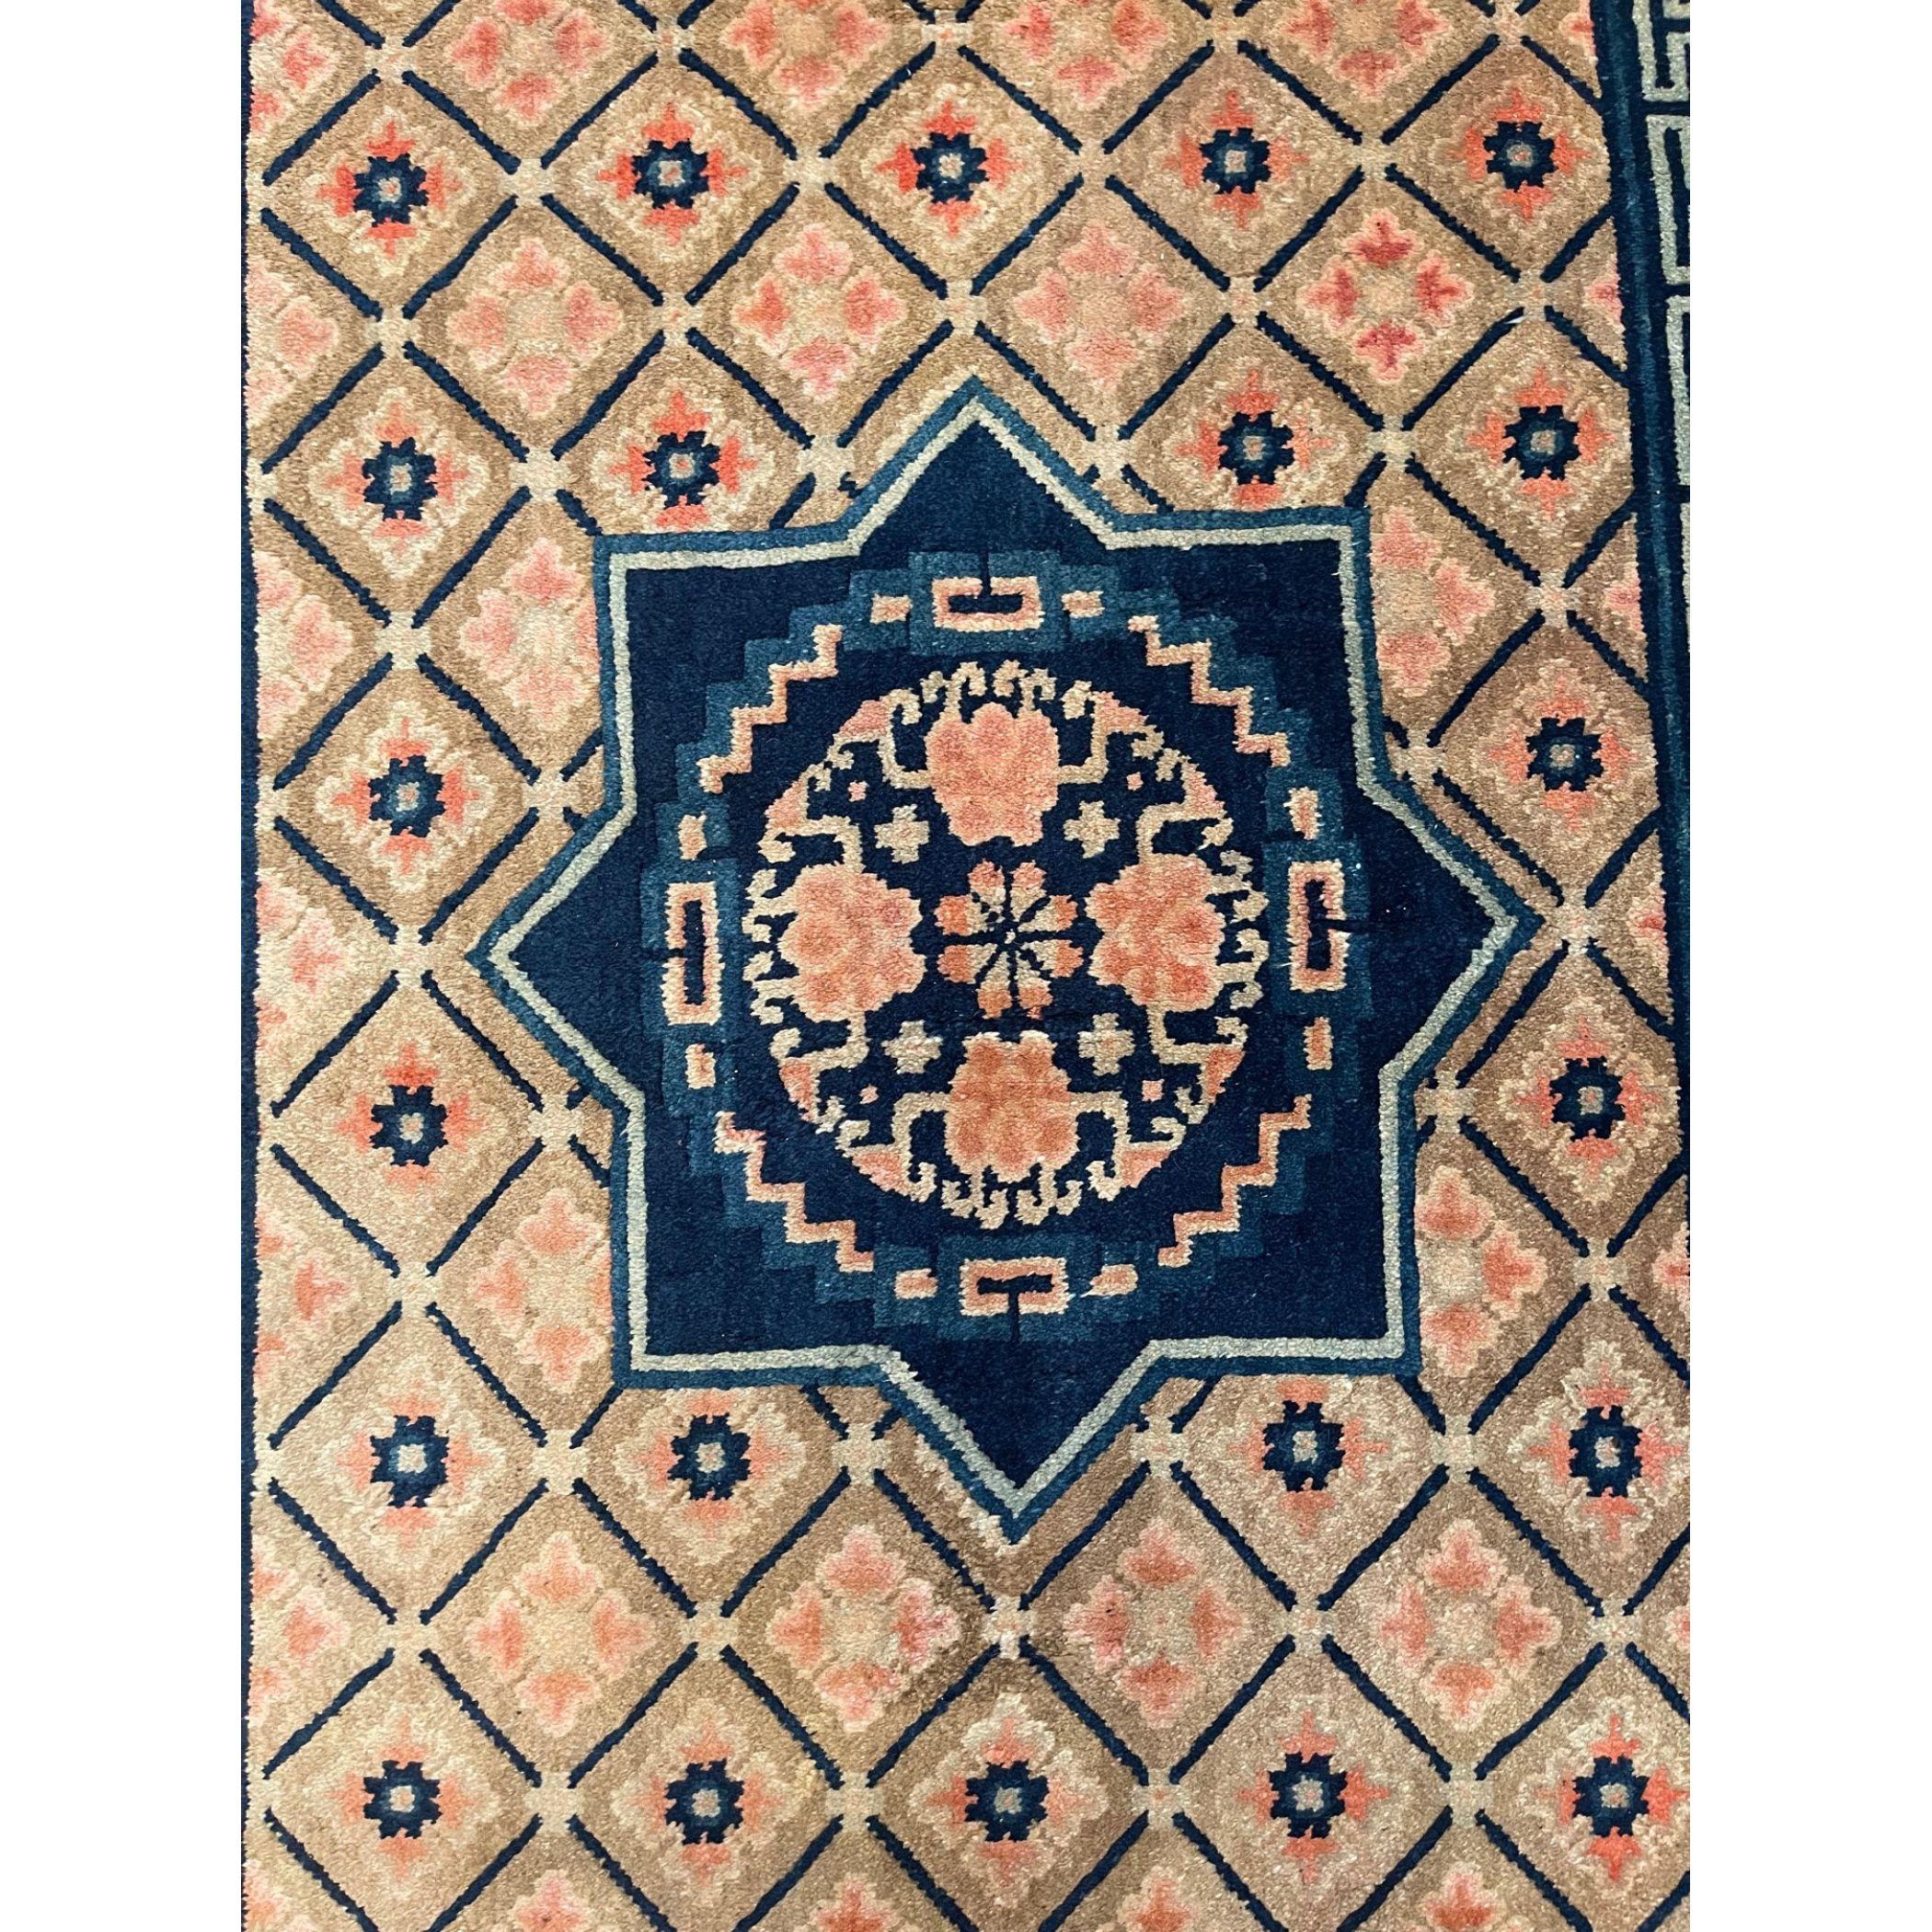 Other 1900s Antique Chinese Small Rug - 7'2'' X 4'5'' For Sale